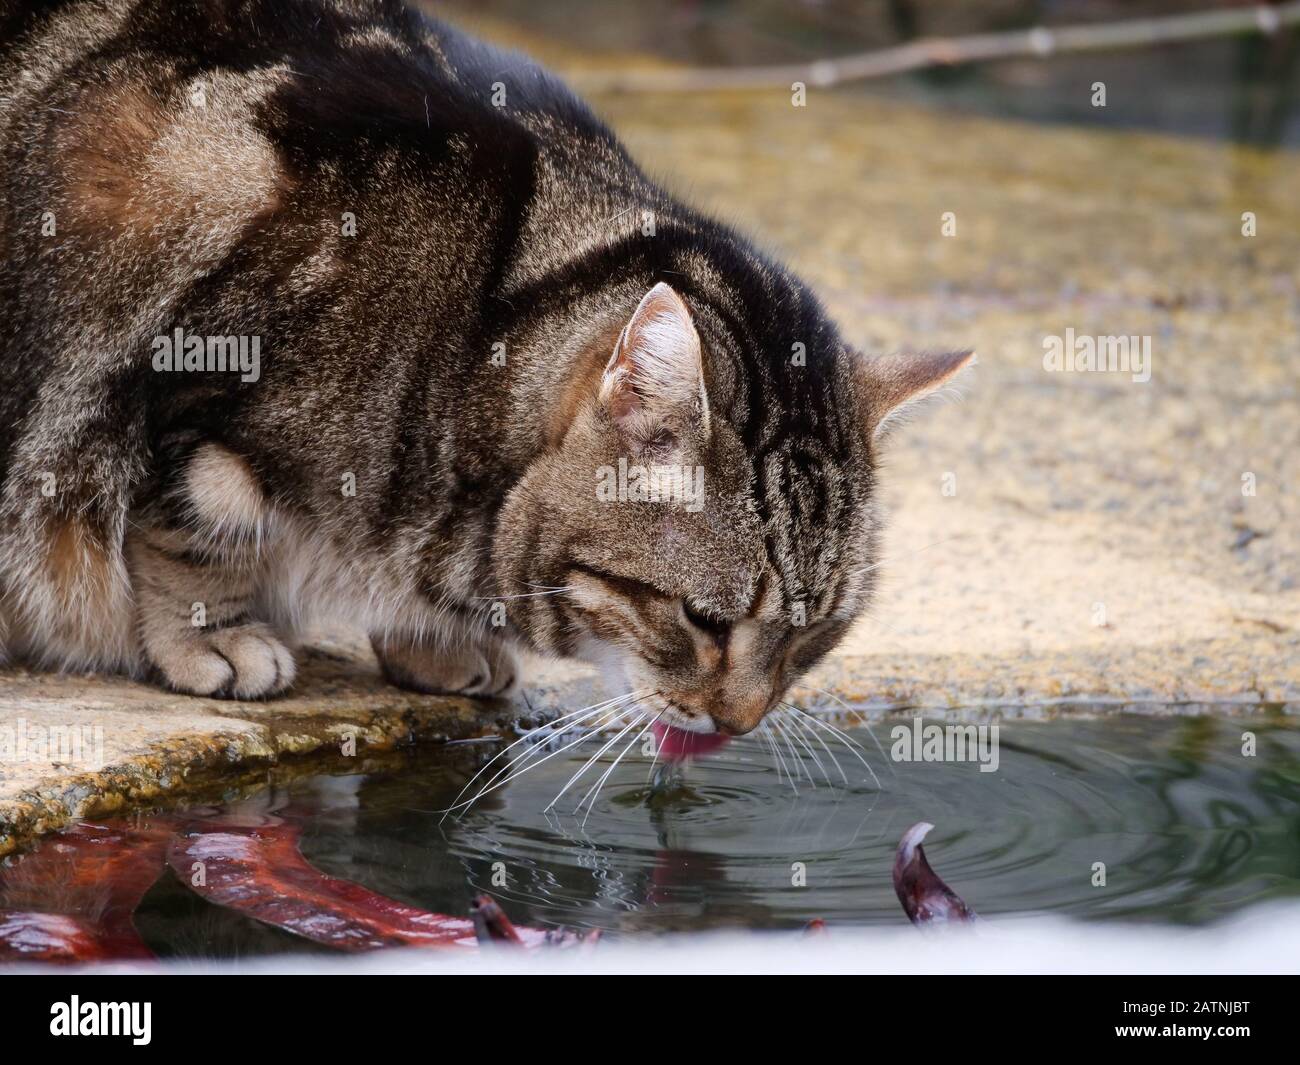 brown and black cat drinking water in a park fountain Stock Photo